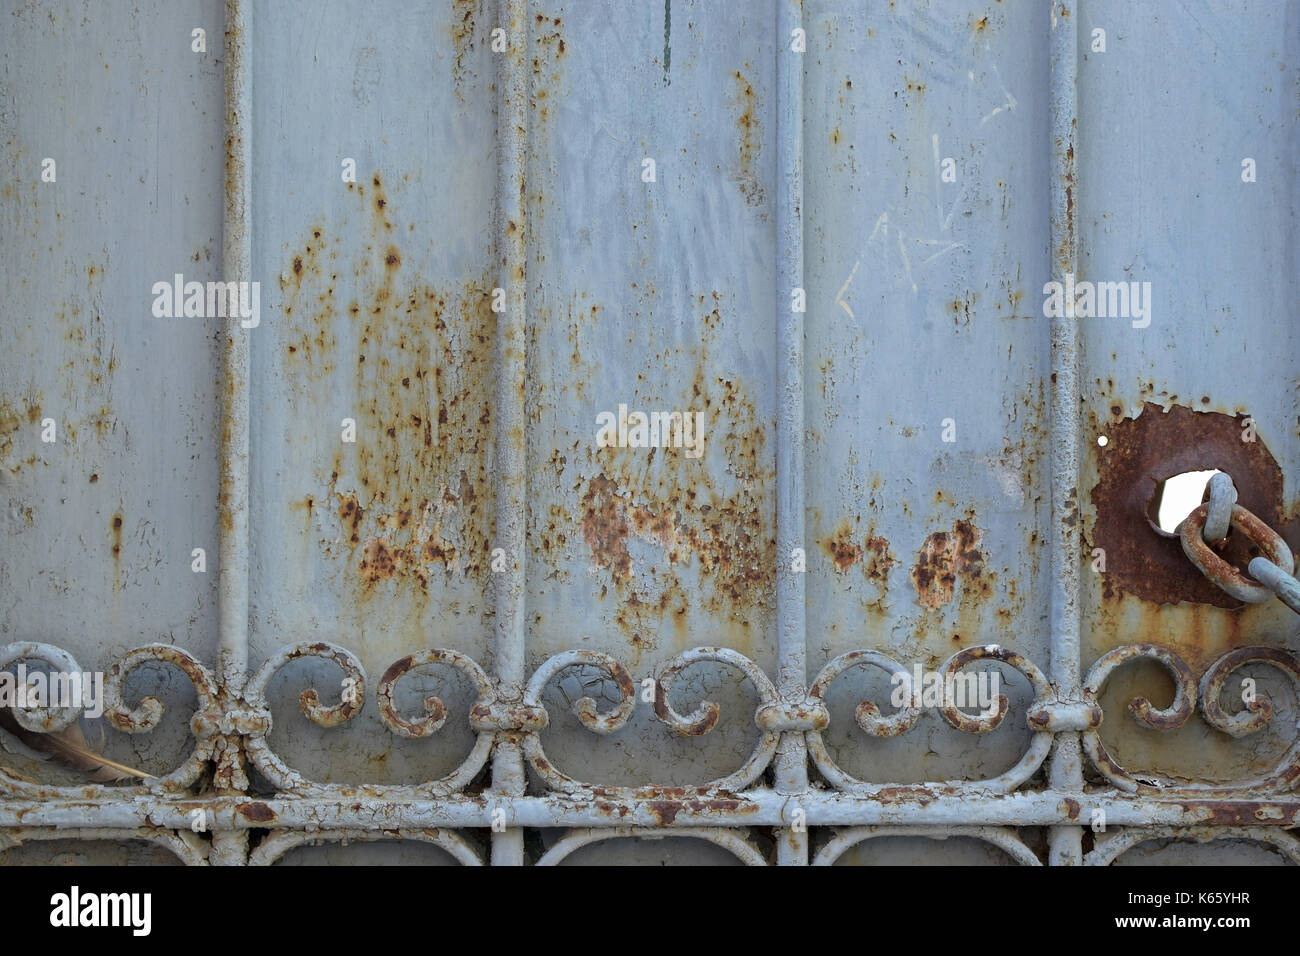 Iron gate rusty metal texture weathered background. Stock Photo